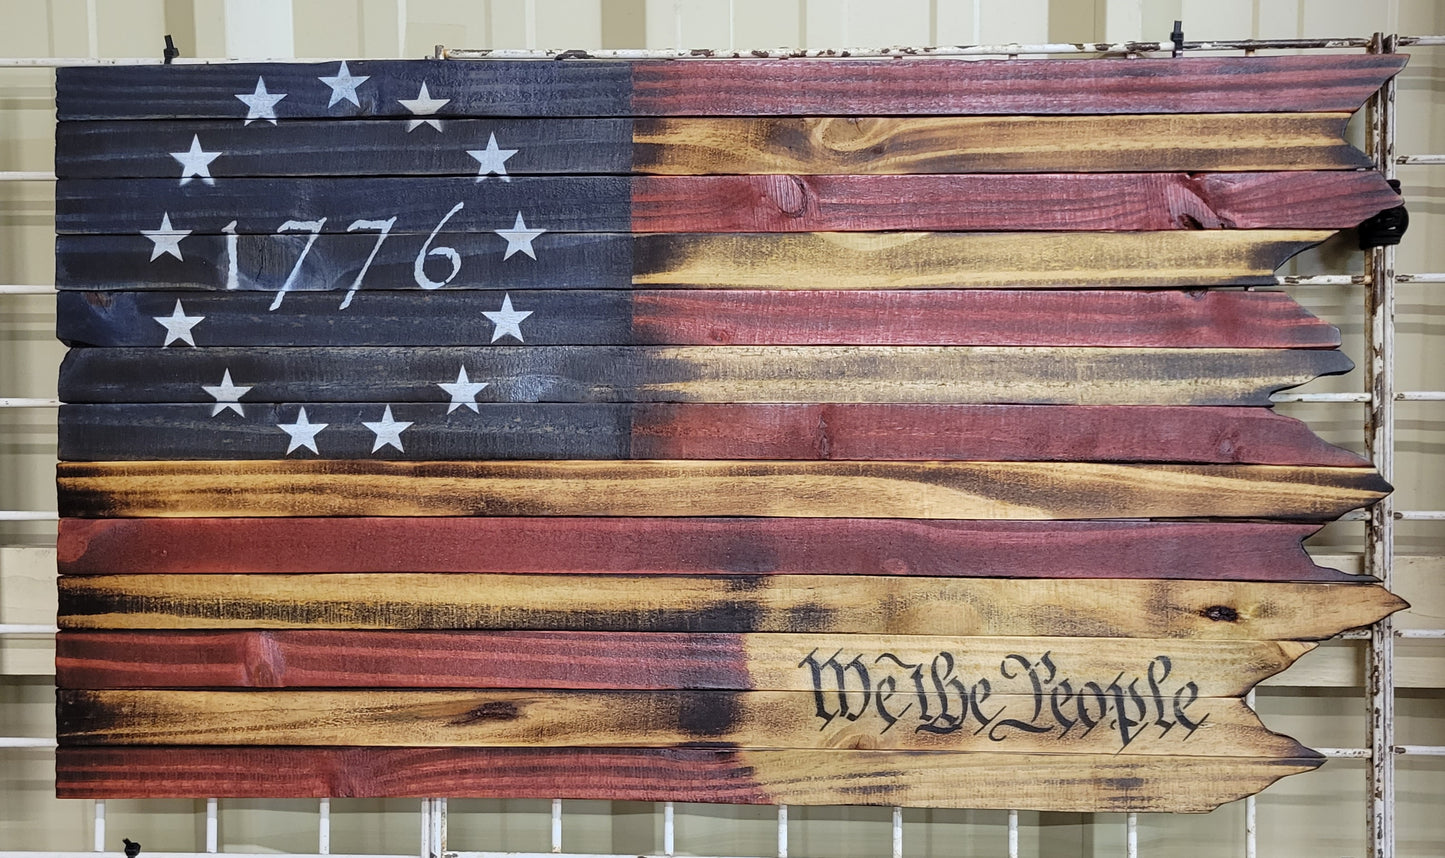 1776 "We The People" Wooden American Flag with Jagged Edge